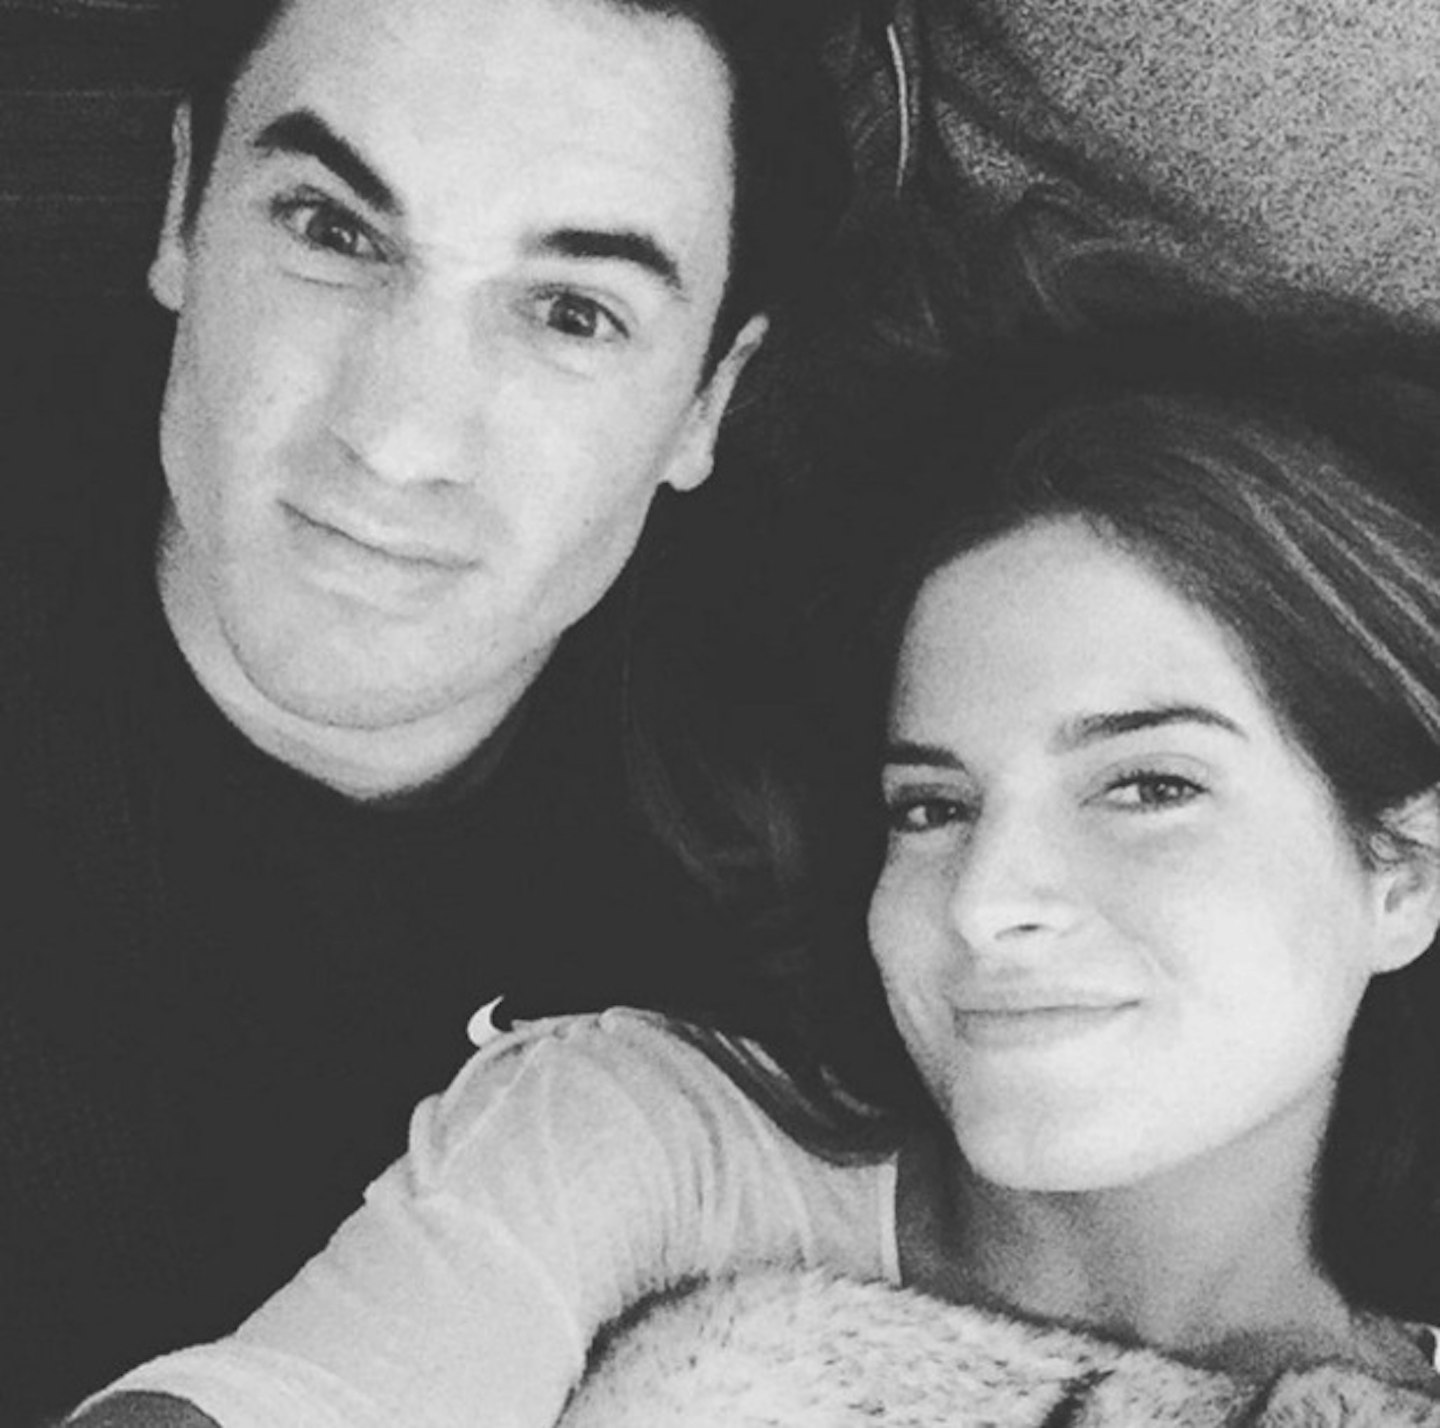 Made In Chelseas Binky Felstead Burst Into Tears When She First Found Out She Was Pregnant